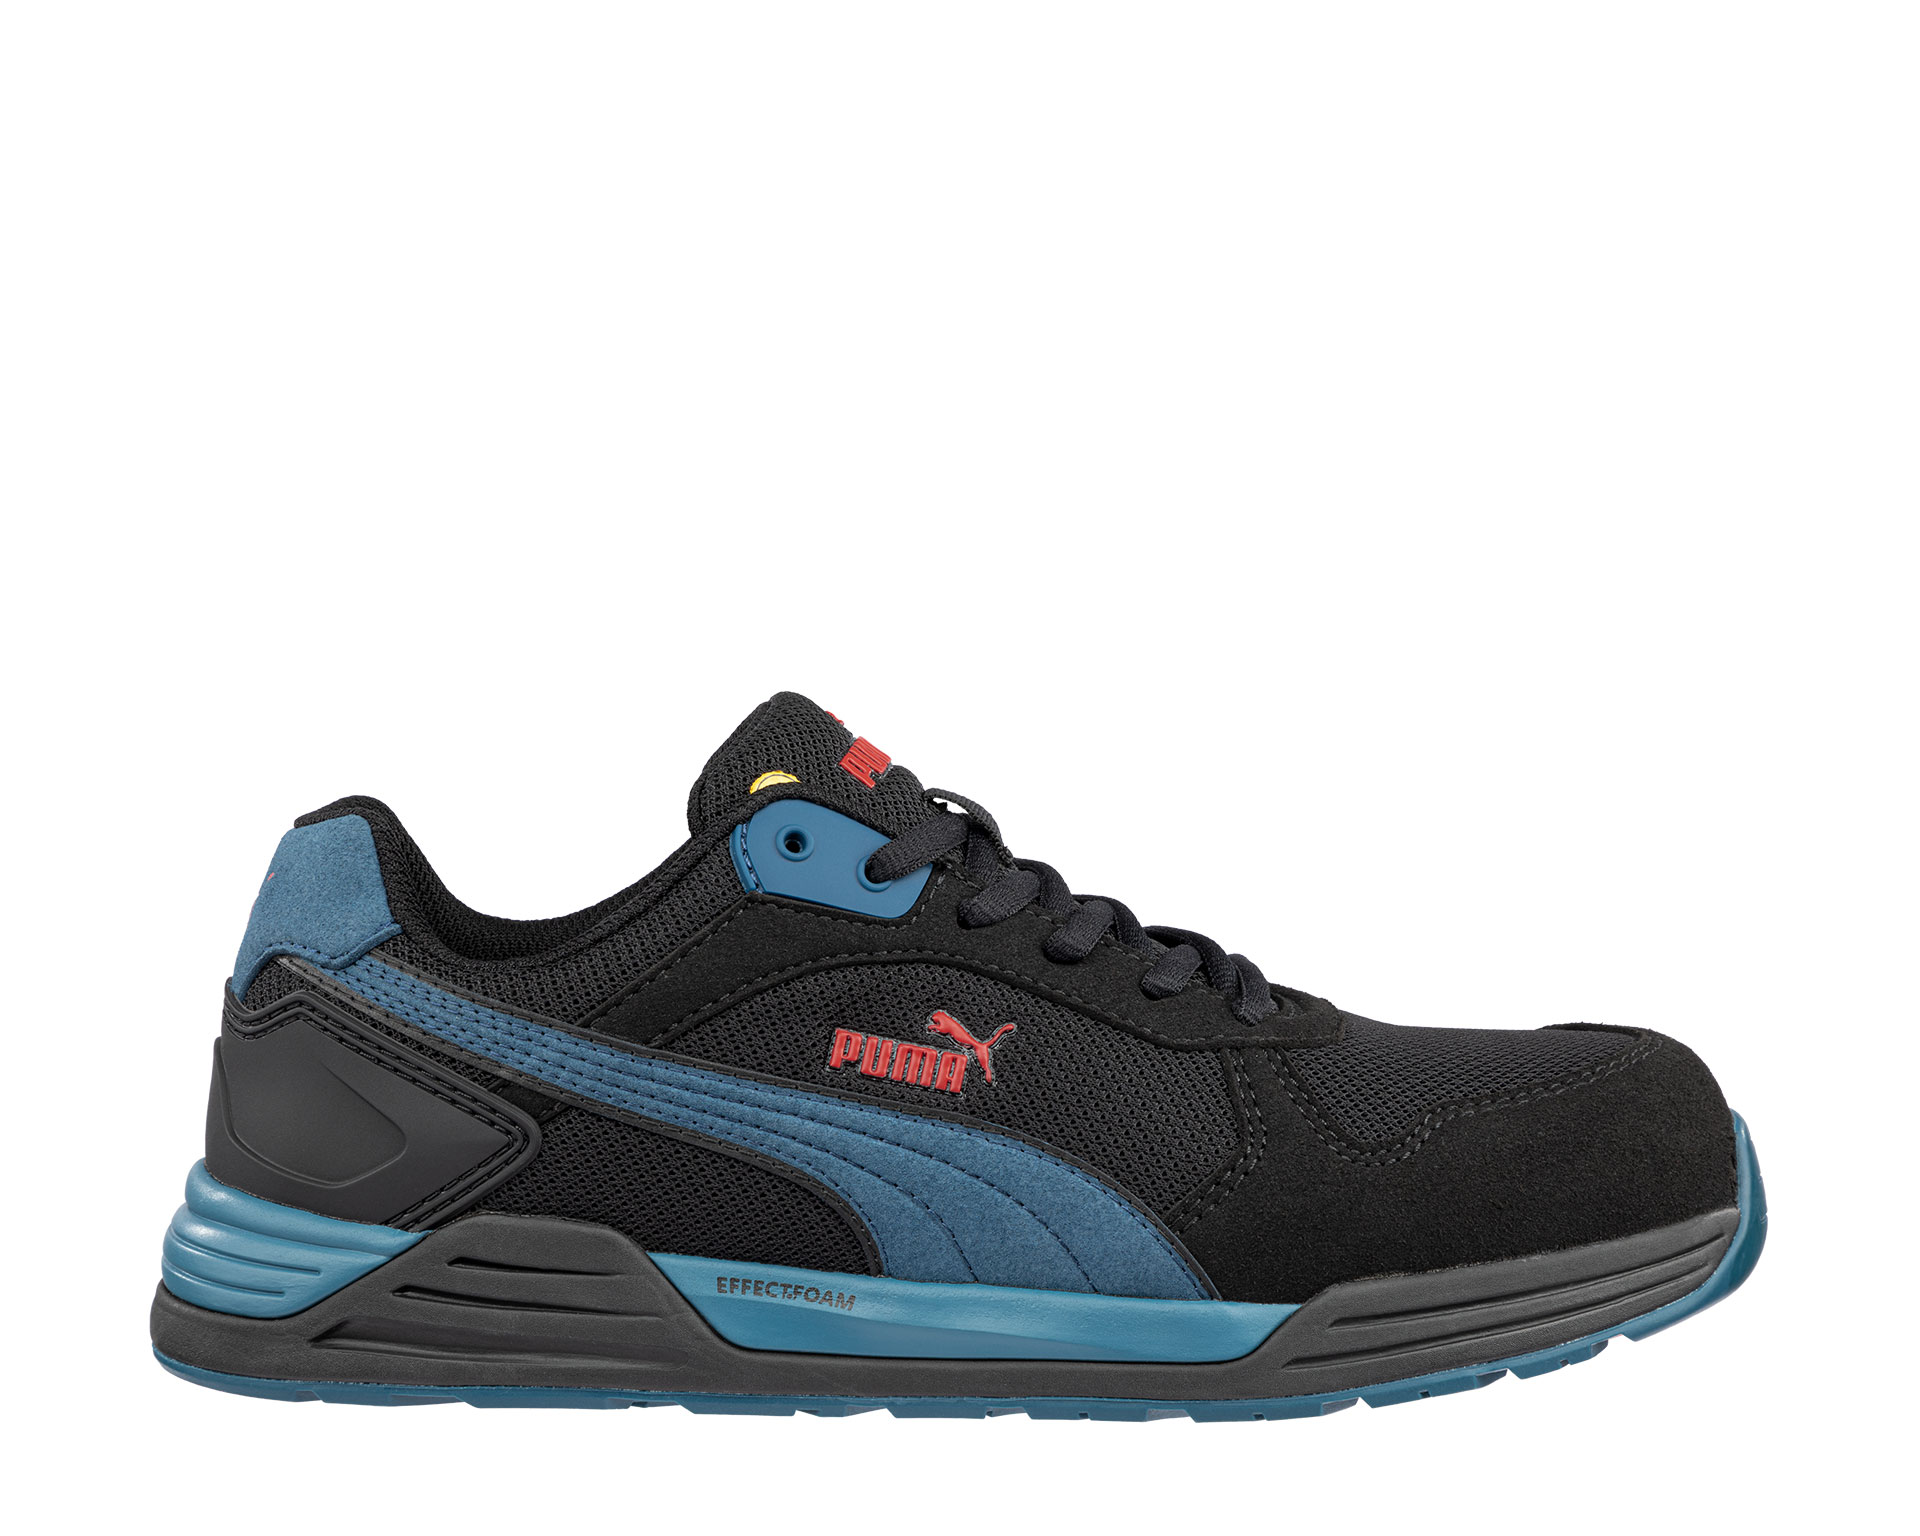 FRONTSIDE BLK/BLUE LOW|PUMA SAFETY safety shoes S1P ESD | Puma Safety ...